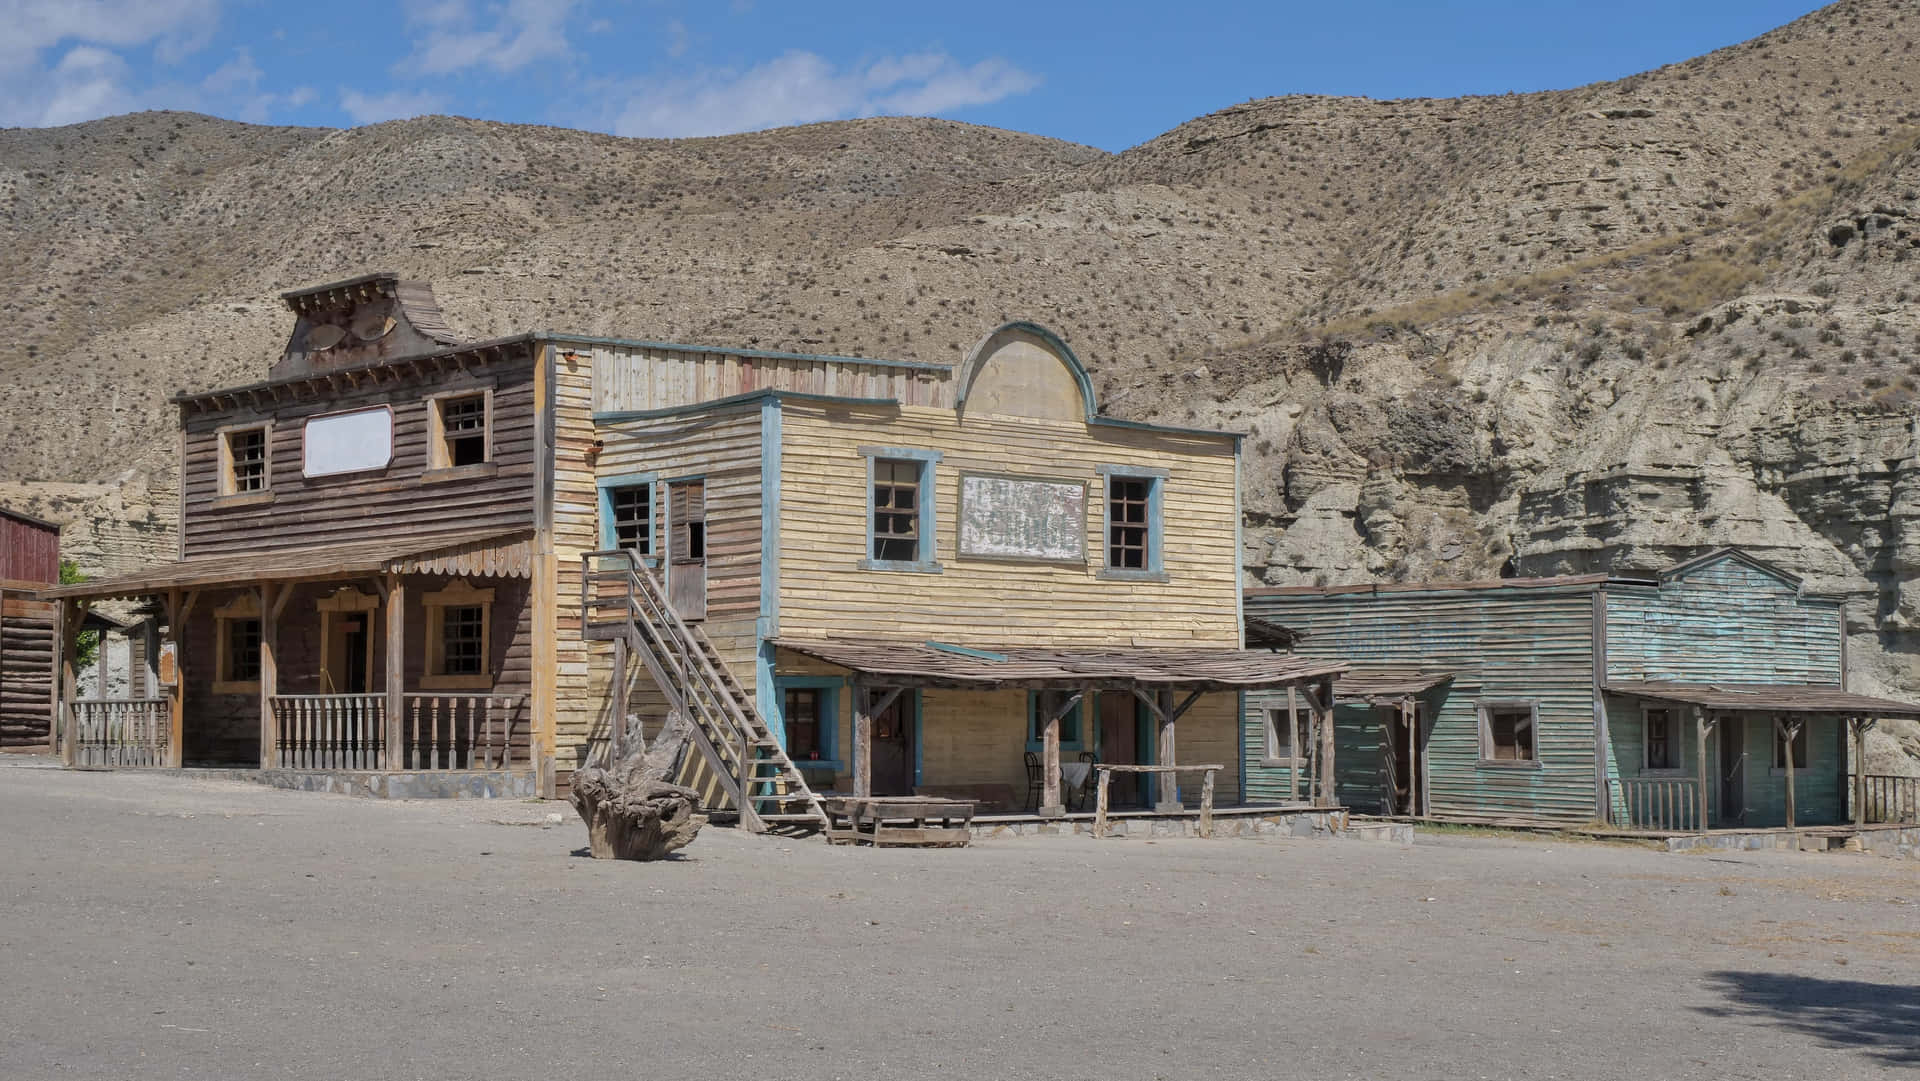 Step into the wild west with a beautiful western landscape